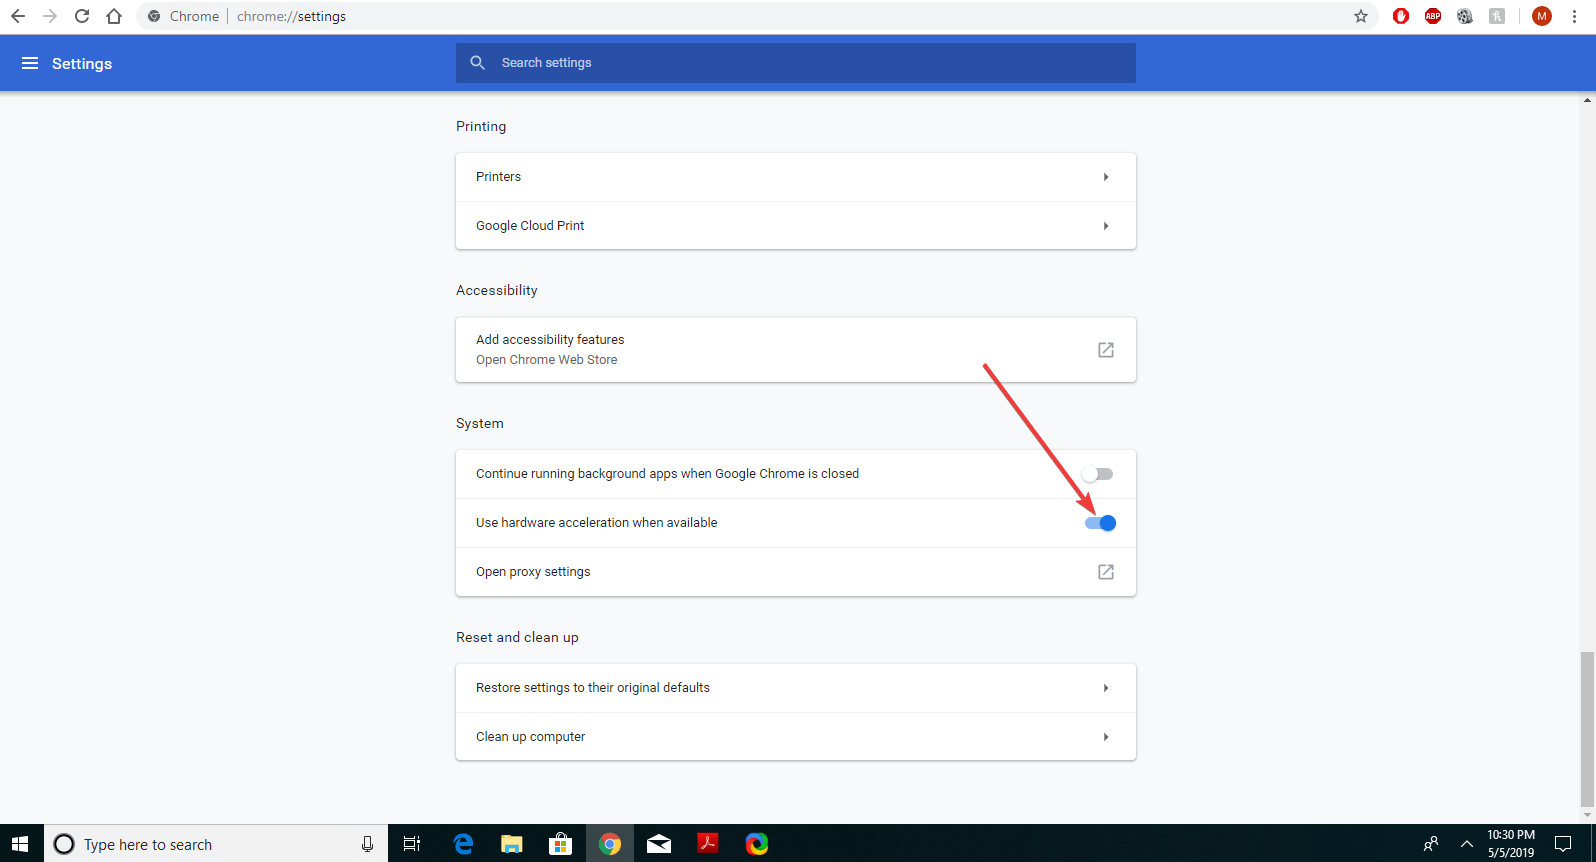 use hardware acceleration image is not displaying in chrome